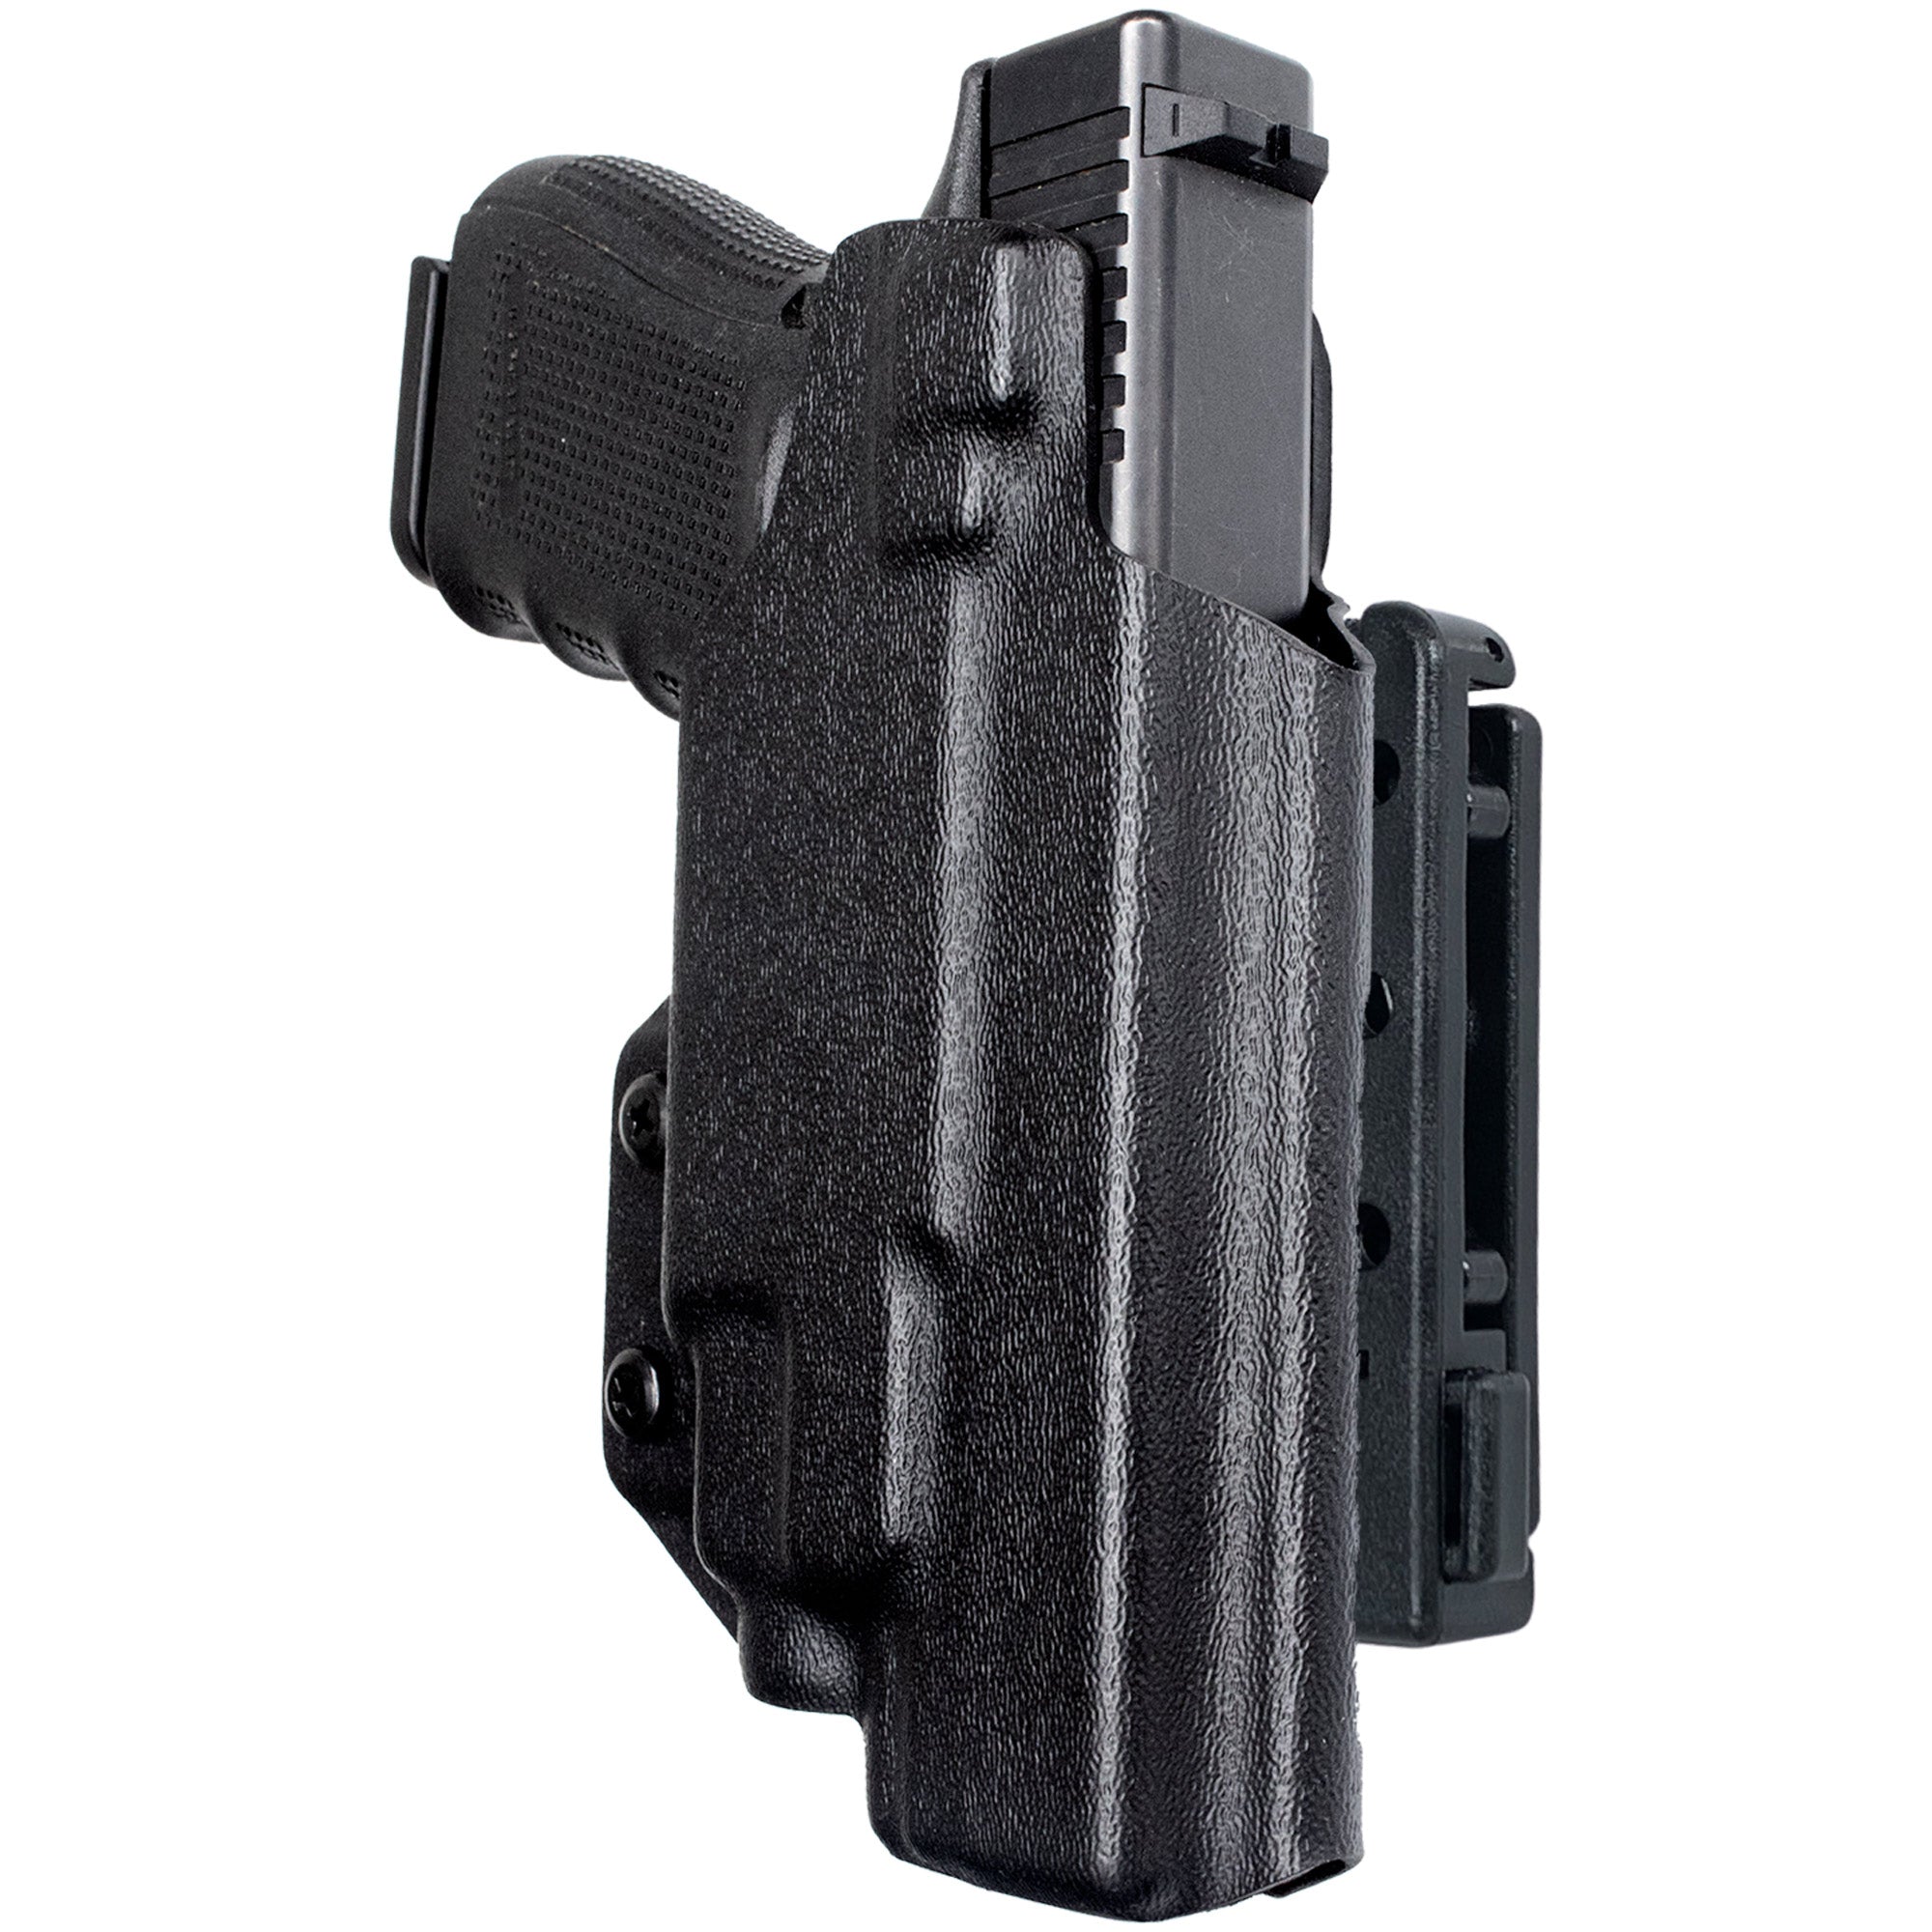 Glock 17, 19,19X, 22, 31, 44, 45 w/ TLR7, TLR8 Pro IDPA Competition Holster